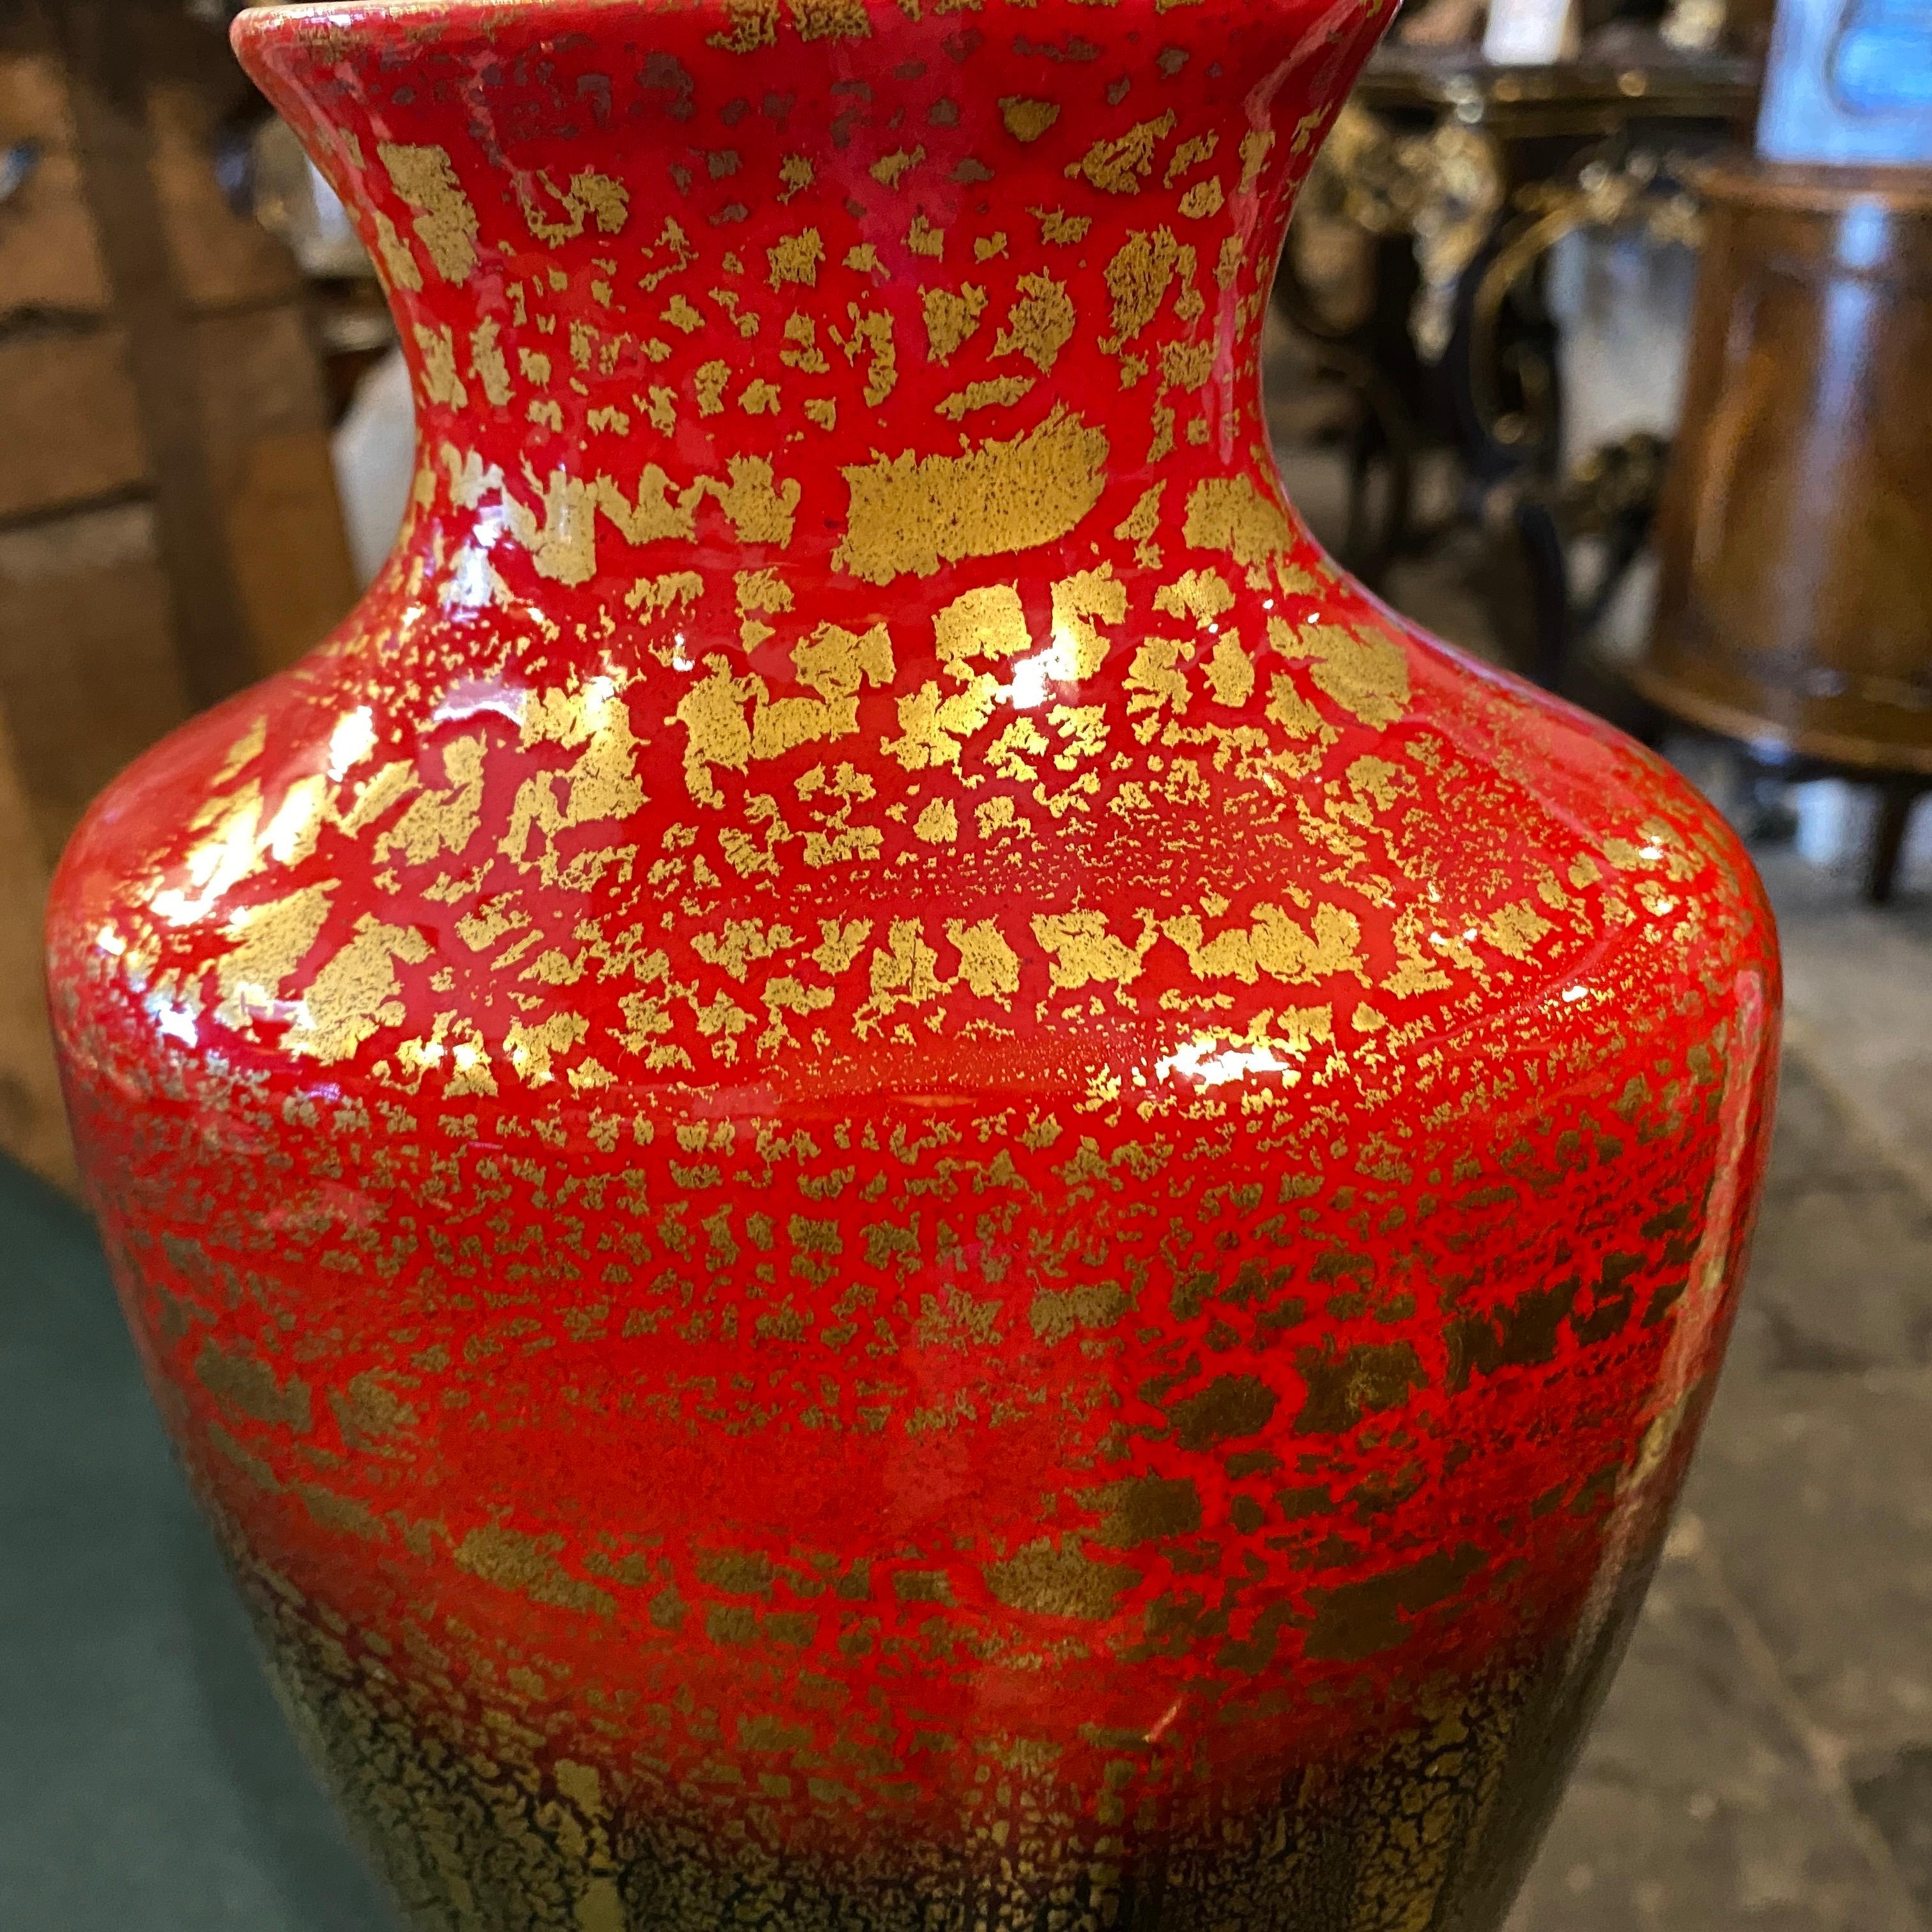 An hand-crafted red, black and gold ceramic vase made in Italy in the Fifties by La Donatella, a small manufacturer located in Northern Italy, it's in perfect conditions and signed on the bottom.